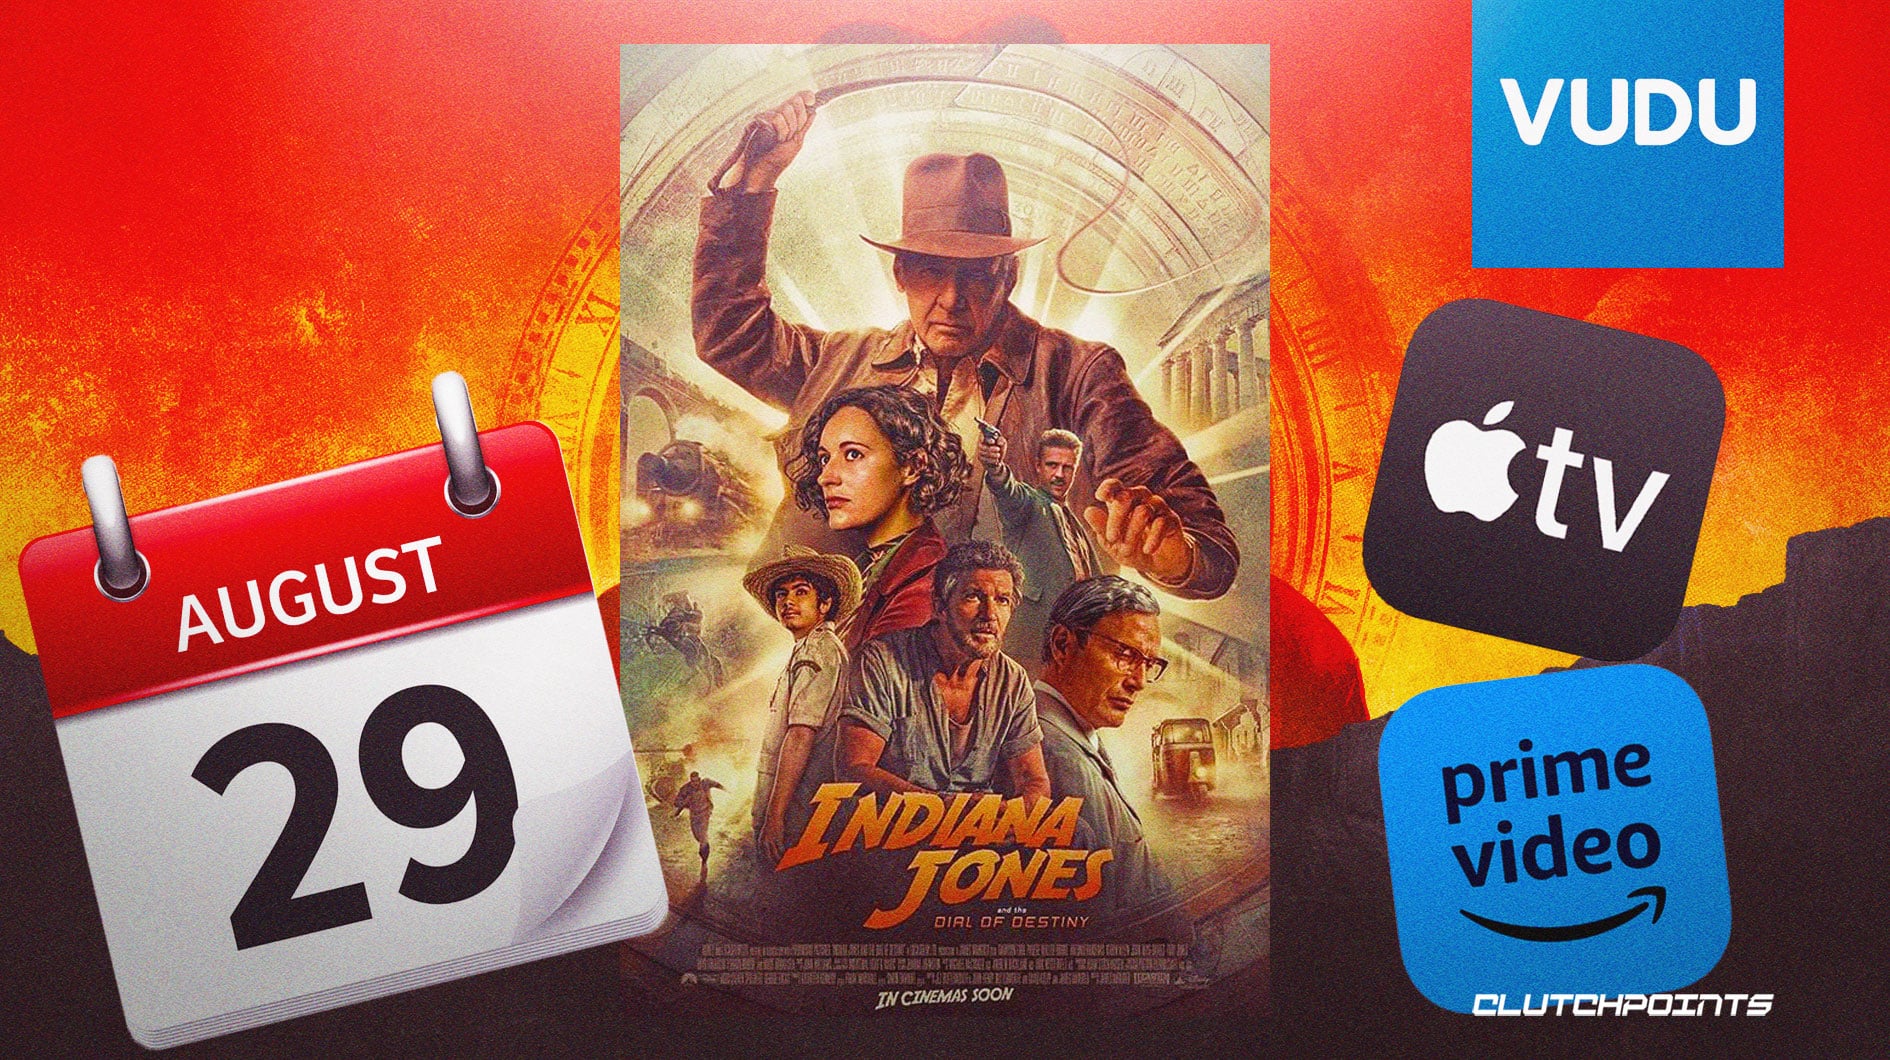 Prime Video: Indiana Jones and the Raiders of the Lost Ark